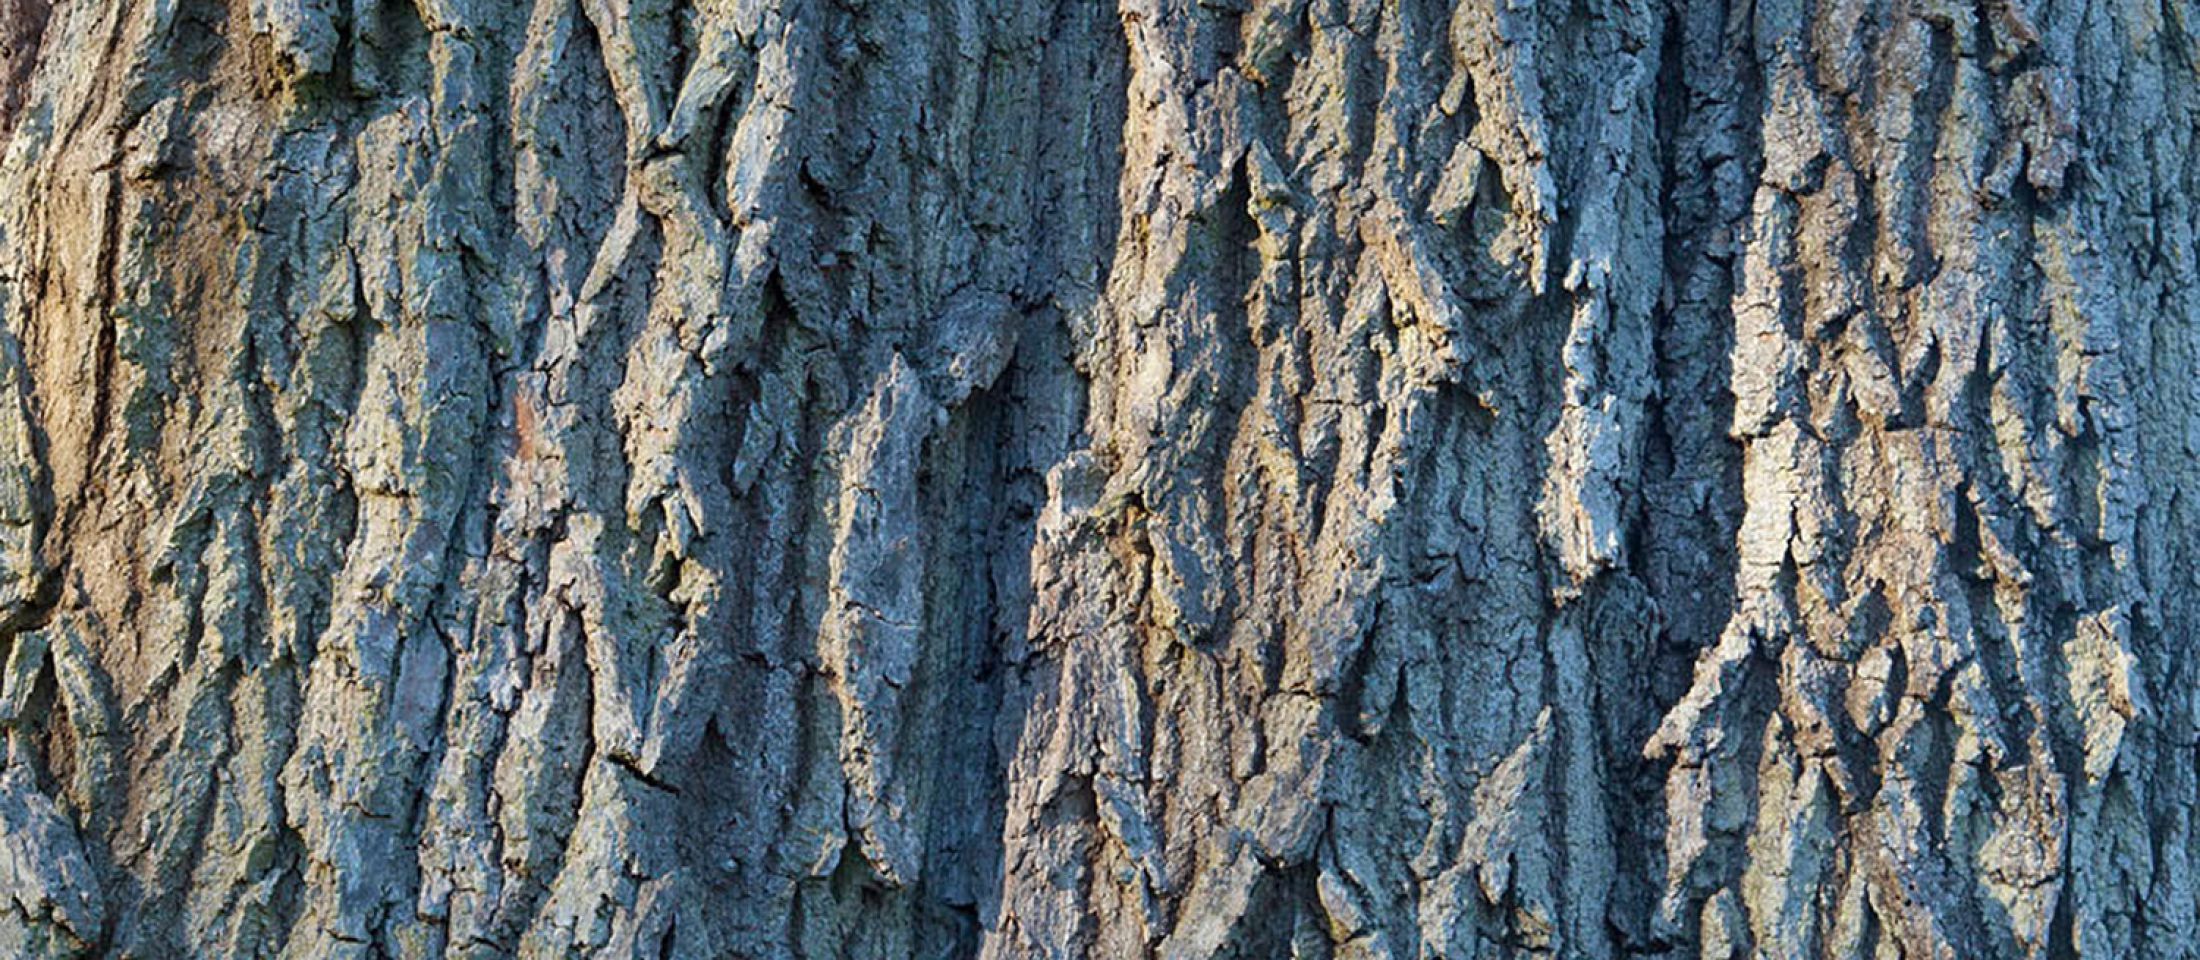 Bark from an ash tree near Ightham Mote and Knole in Kent. Photo: John Miller.